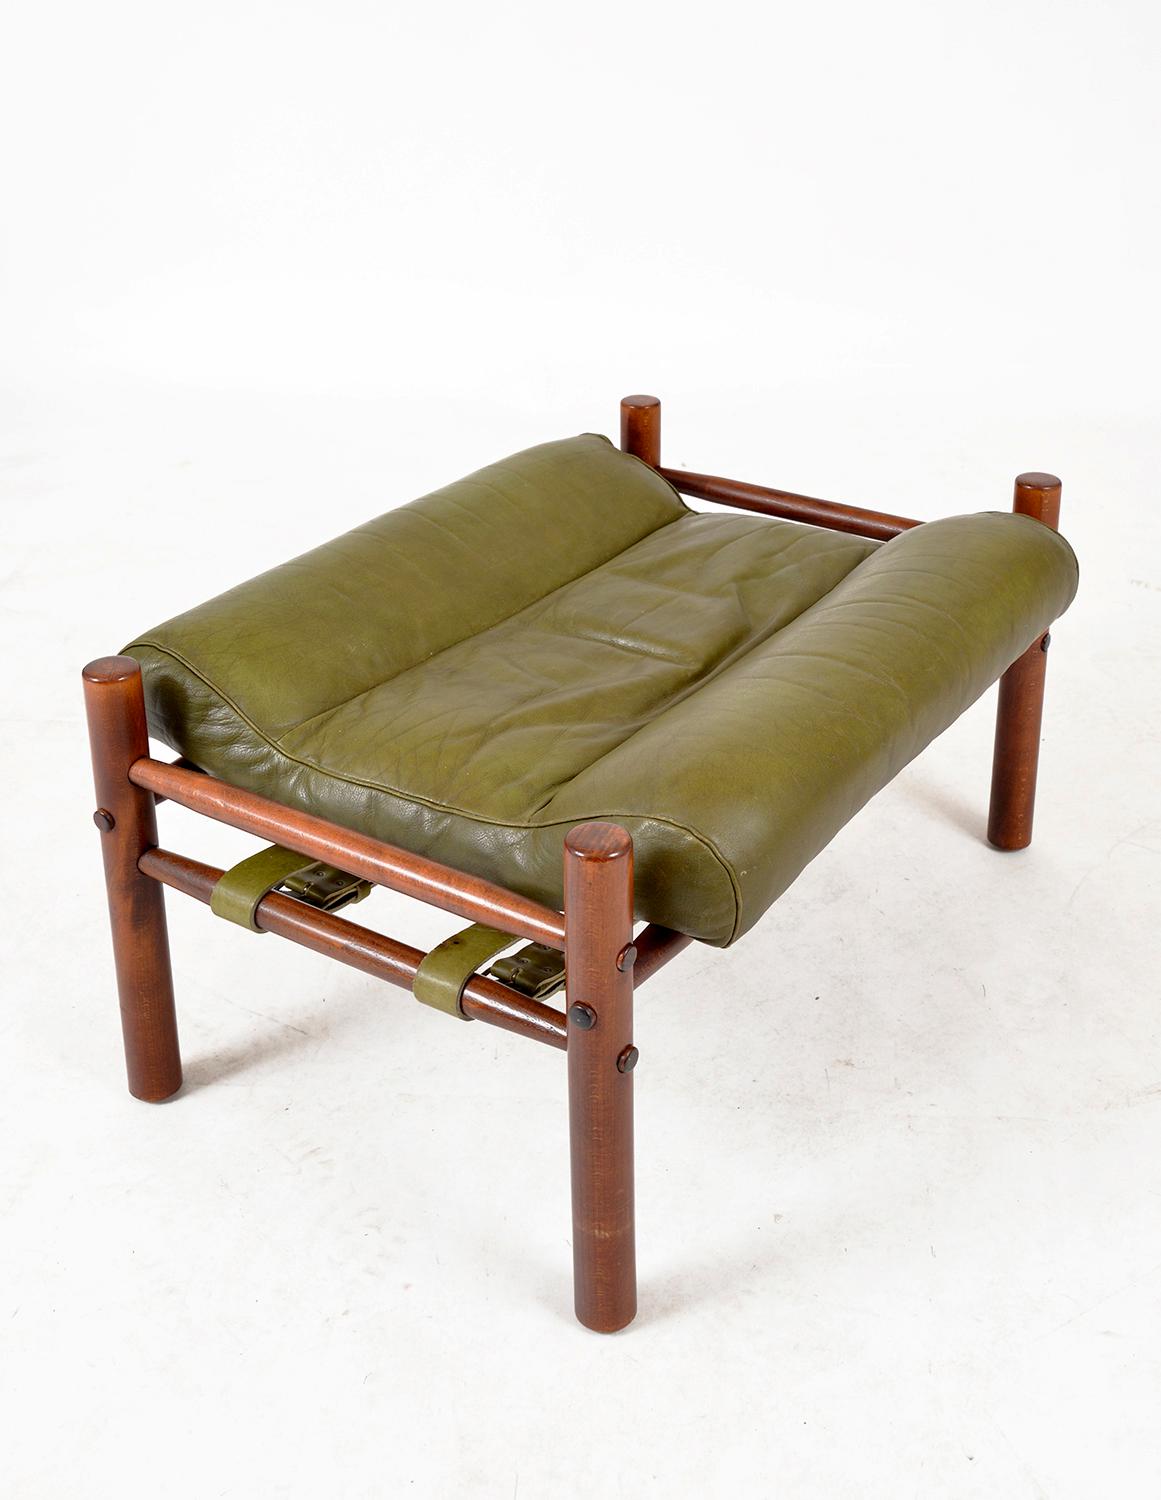 A beautiful example of a 1960s “Inca” ottoman by Arne Norell in stained beech and original green leather, manufactured by Möbel AB Arne Norell in Aneby, Sweden. The footstool is in wonderful condition with very little wear considering its age, and